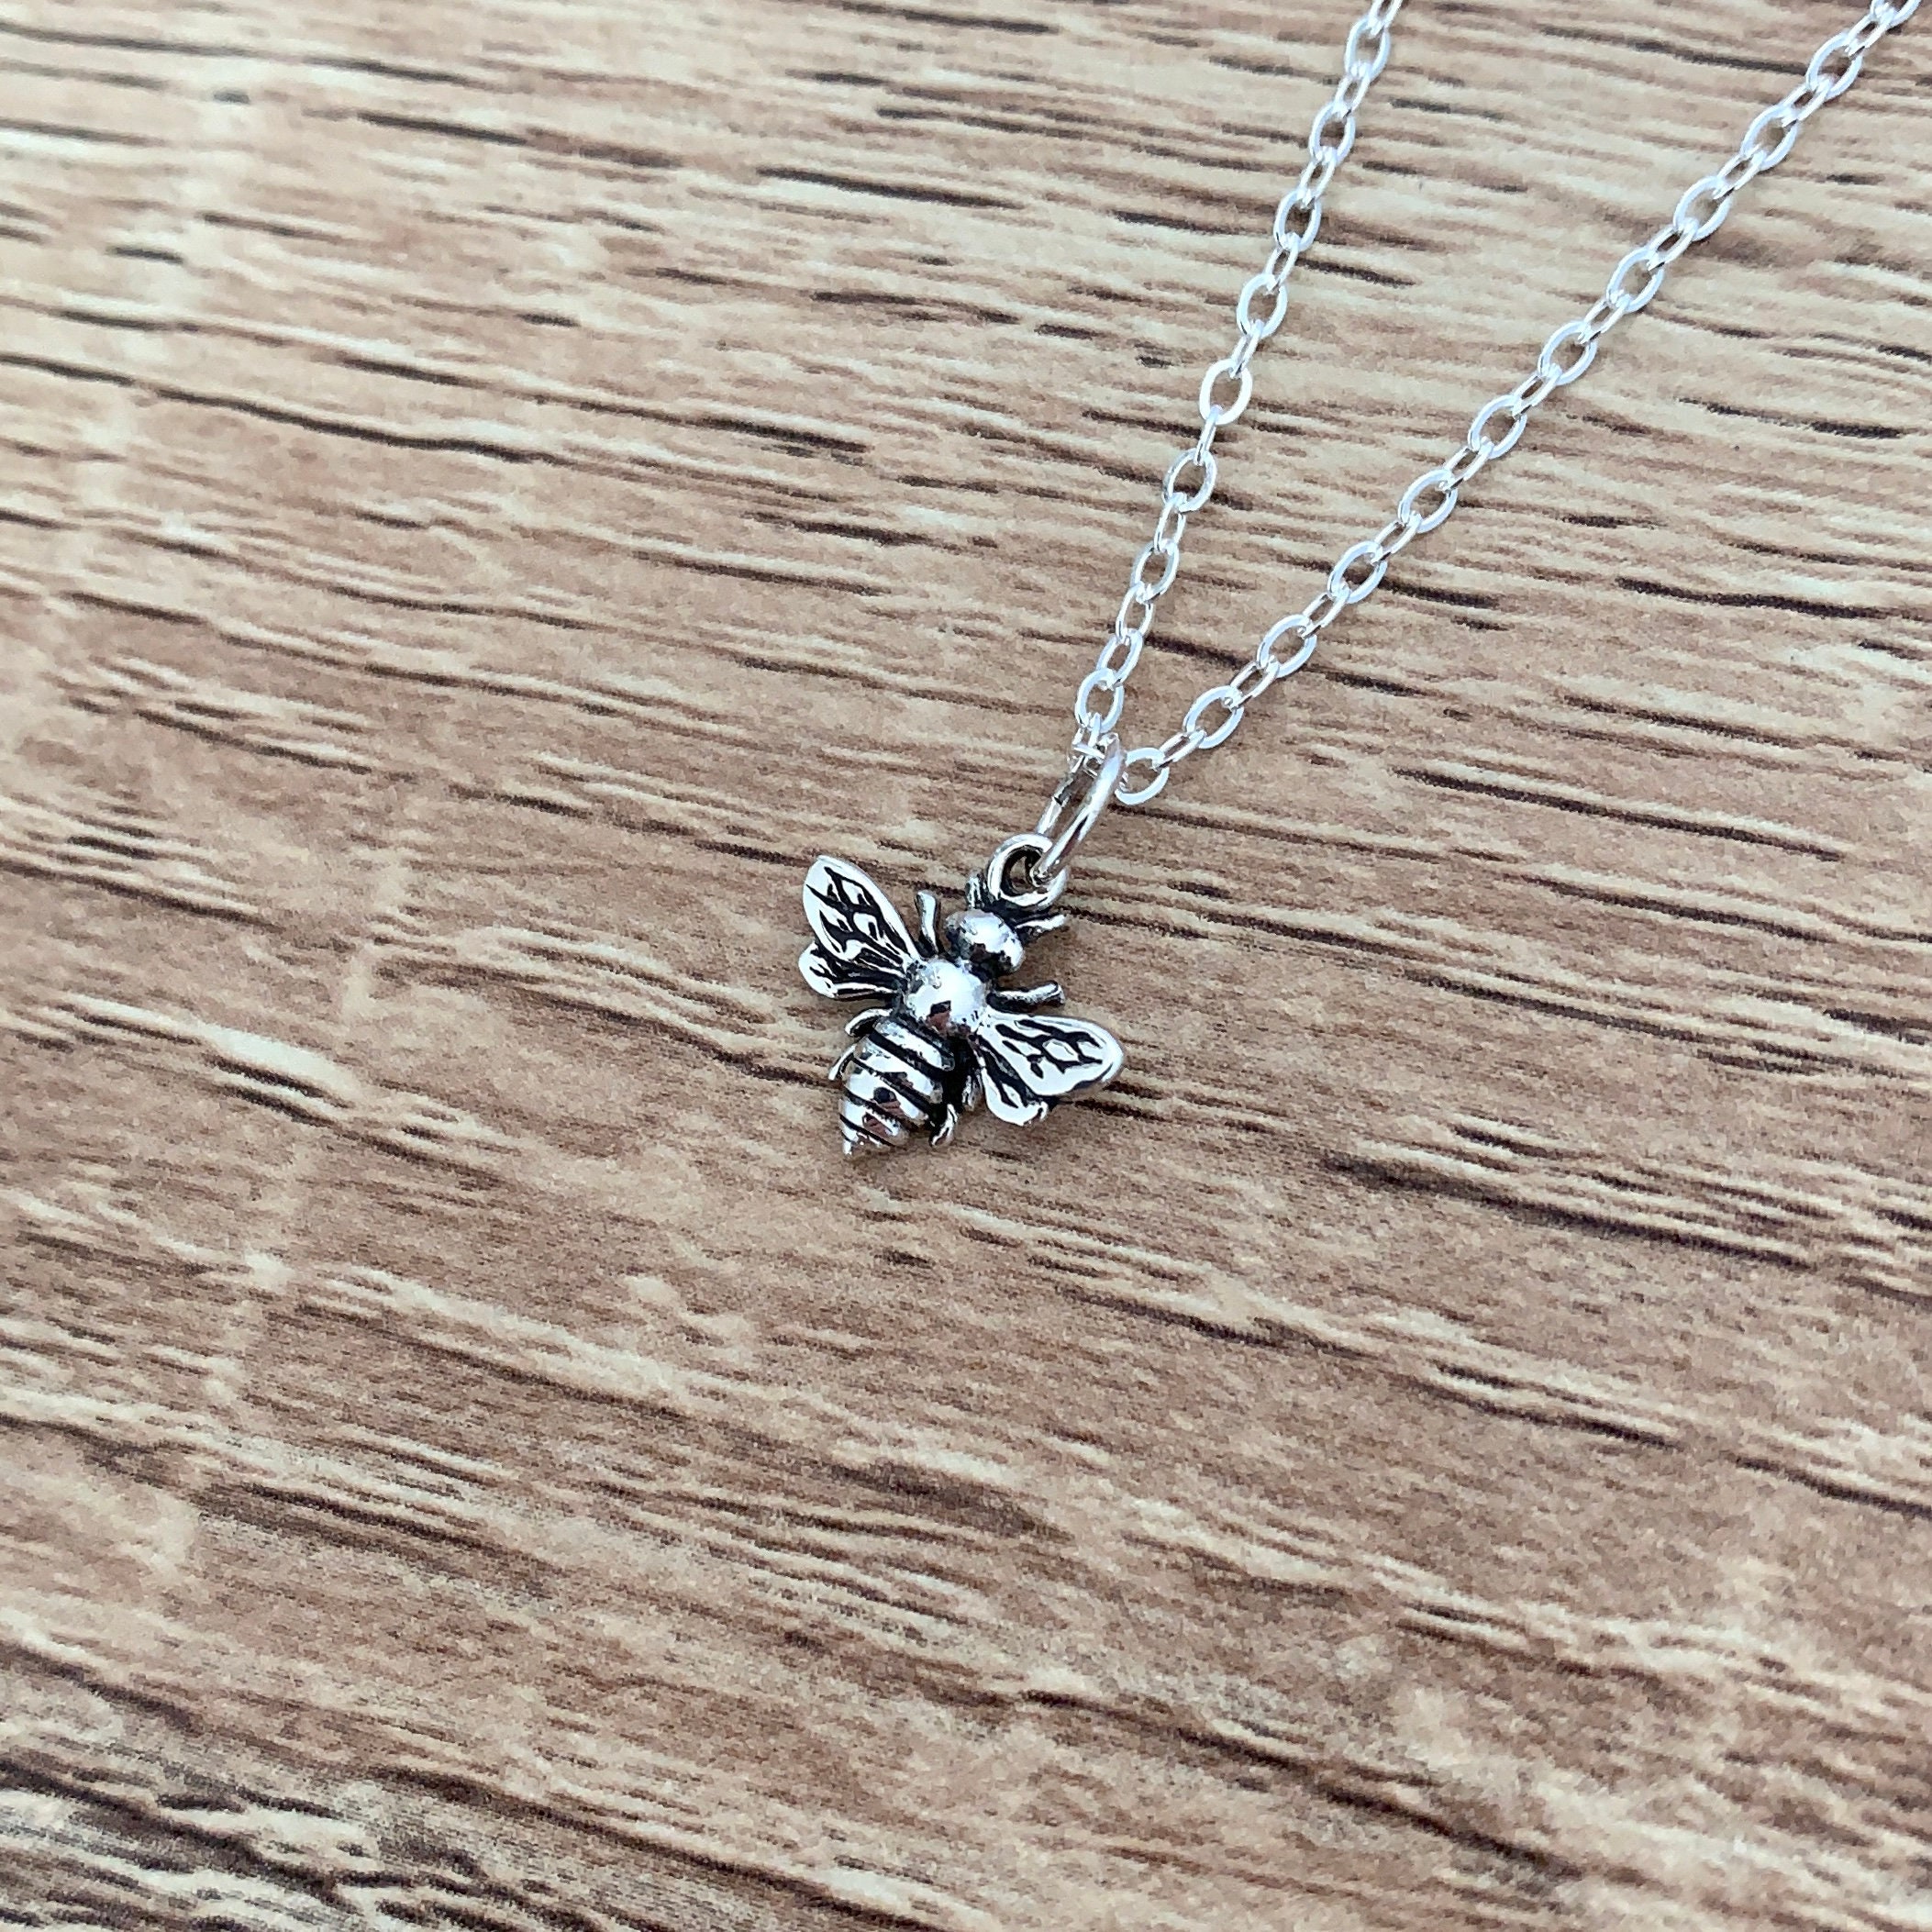 Pophylis Bee Necklace in Gold Silver 925 Sterling Tiny Honeybee Charm Necklace Graduation Gift